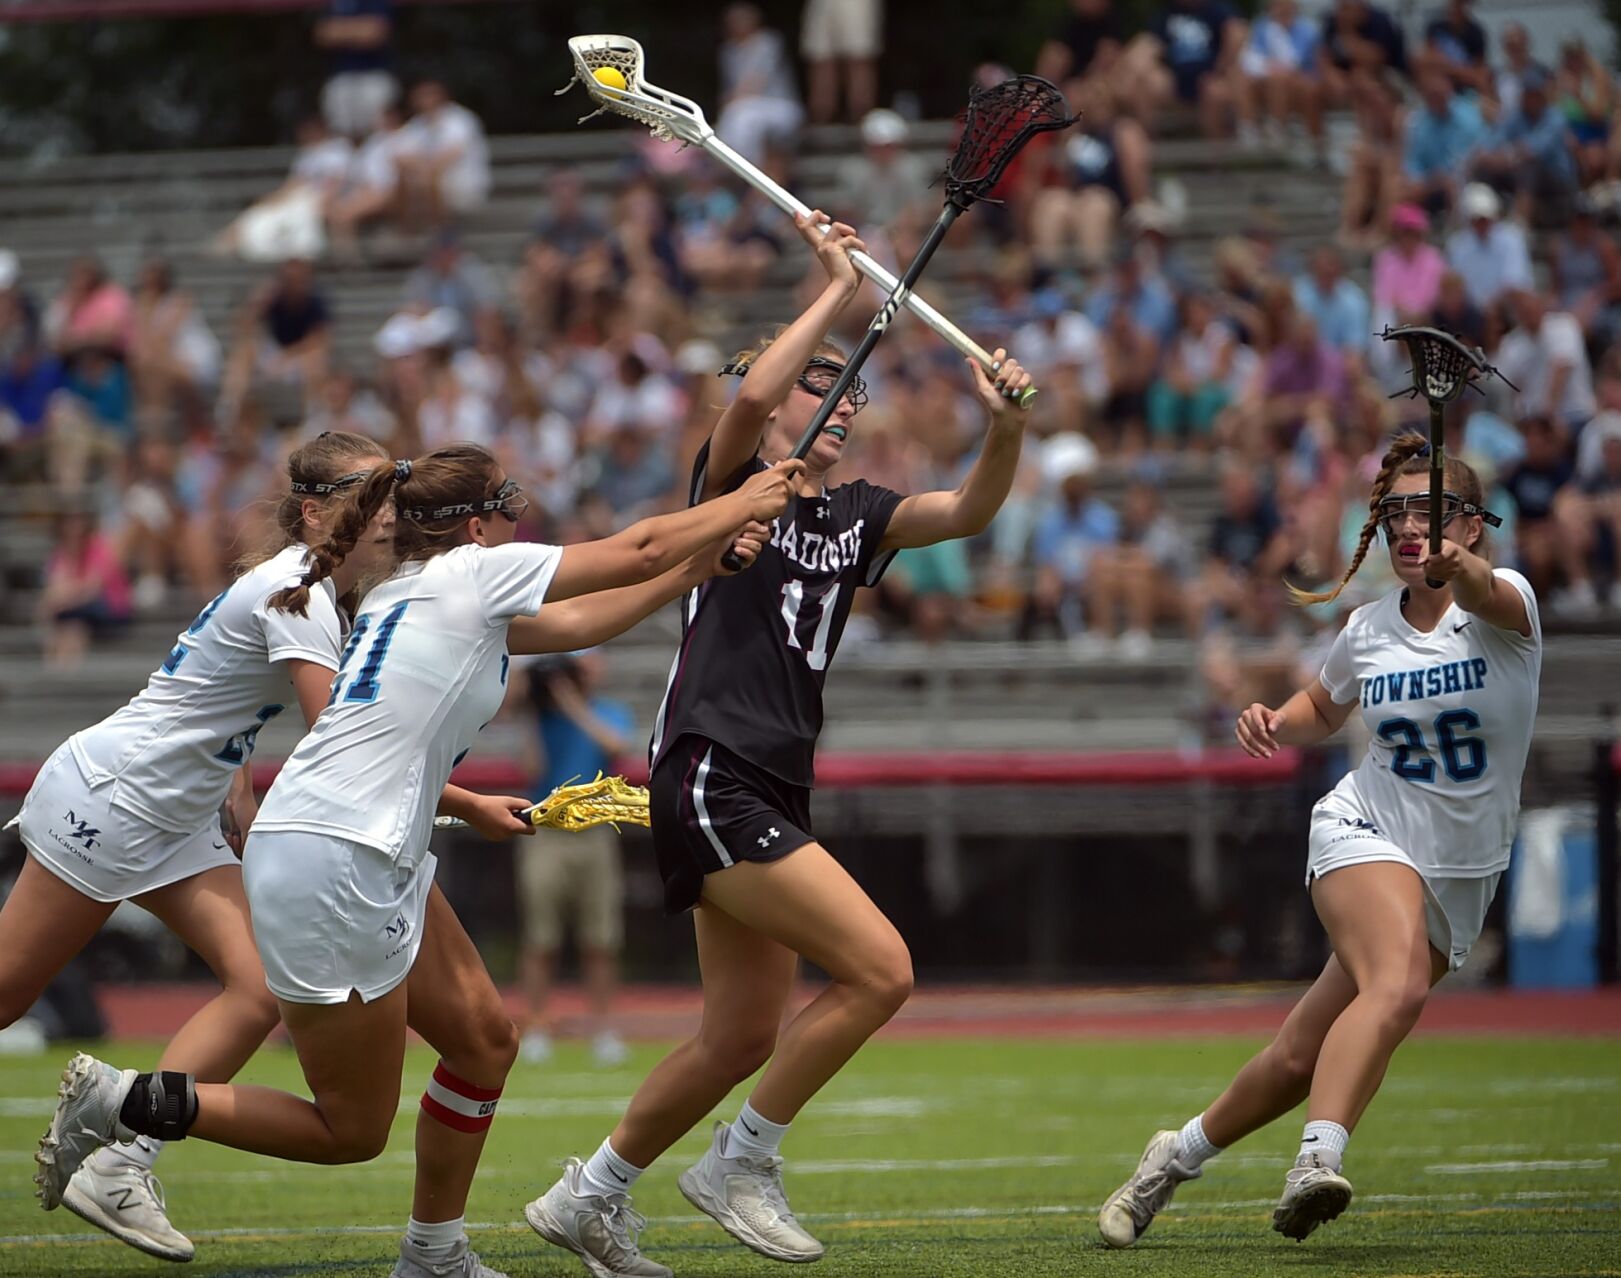 PIAA Class 3A Girls Lacrosse Early on Kristin Addis laid down the law